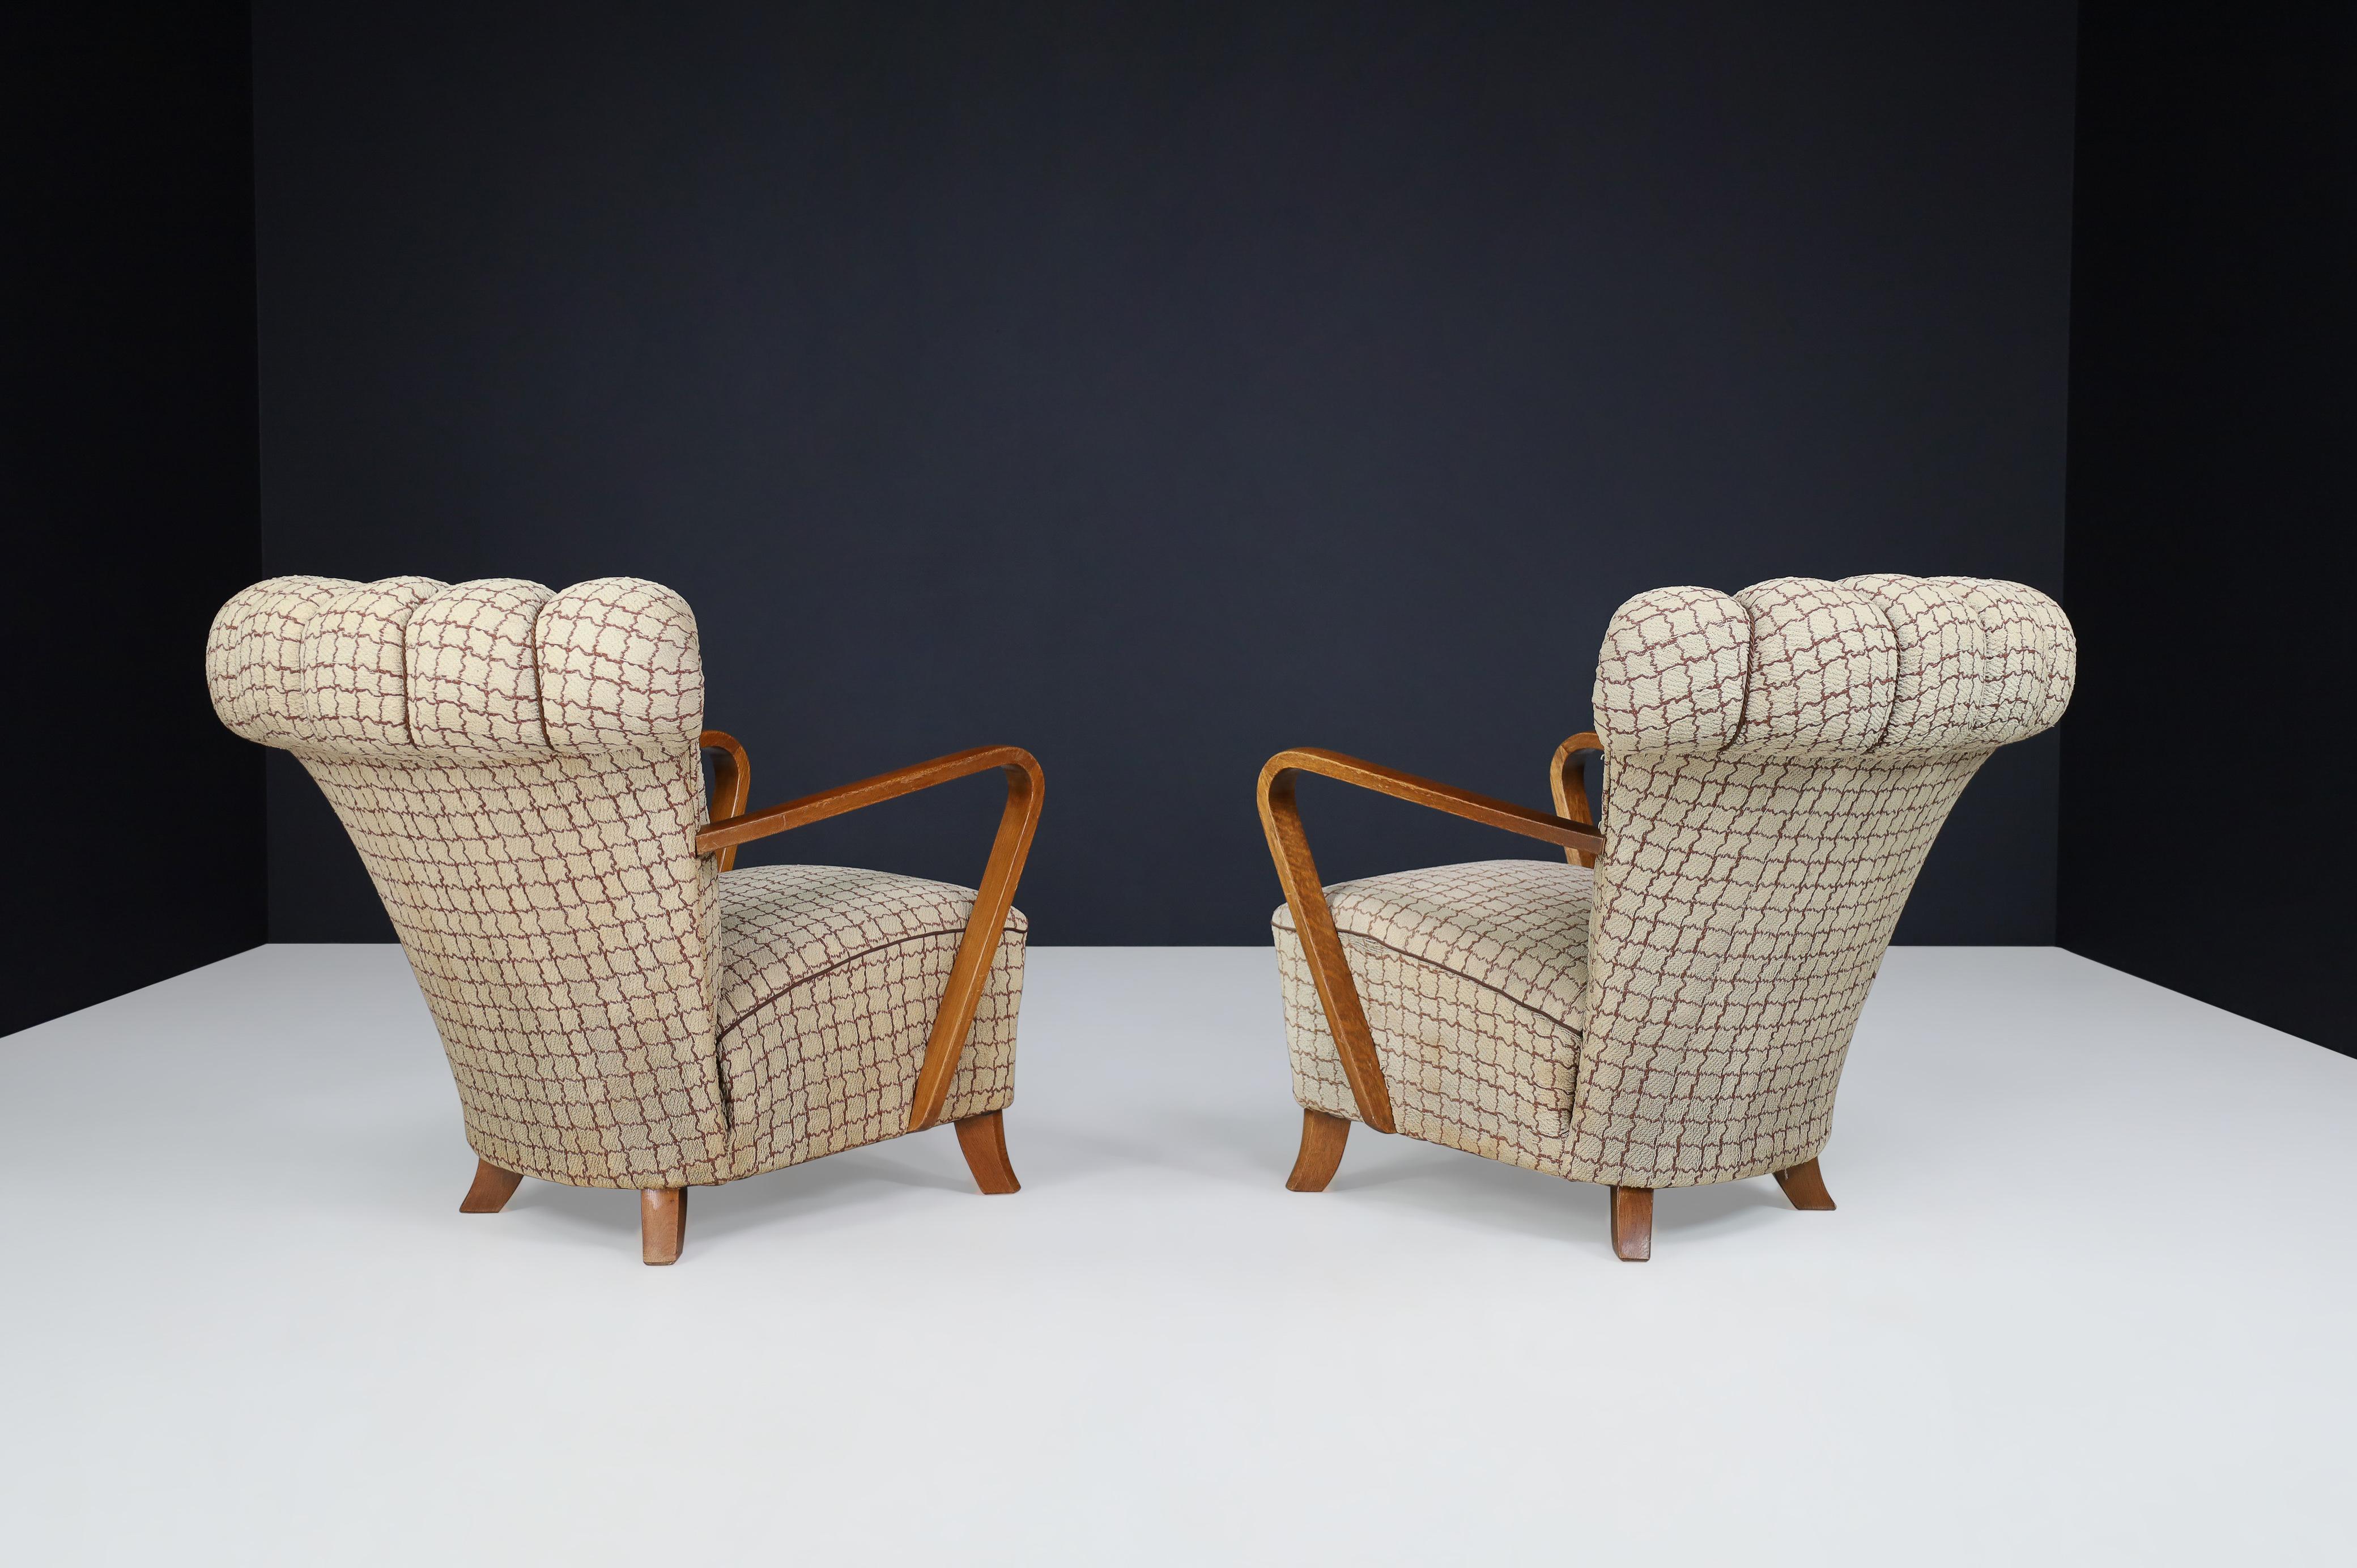 Art Deco Fan-Shaped Armchairs in Bentwood and Original Upholstery, Praque, 1930s For Sale 5